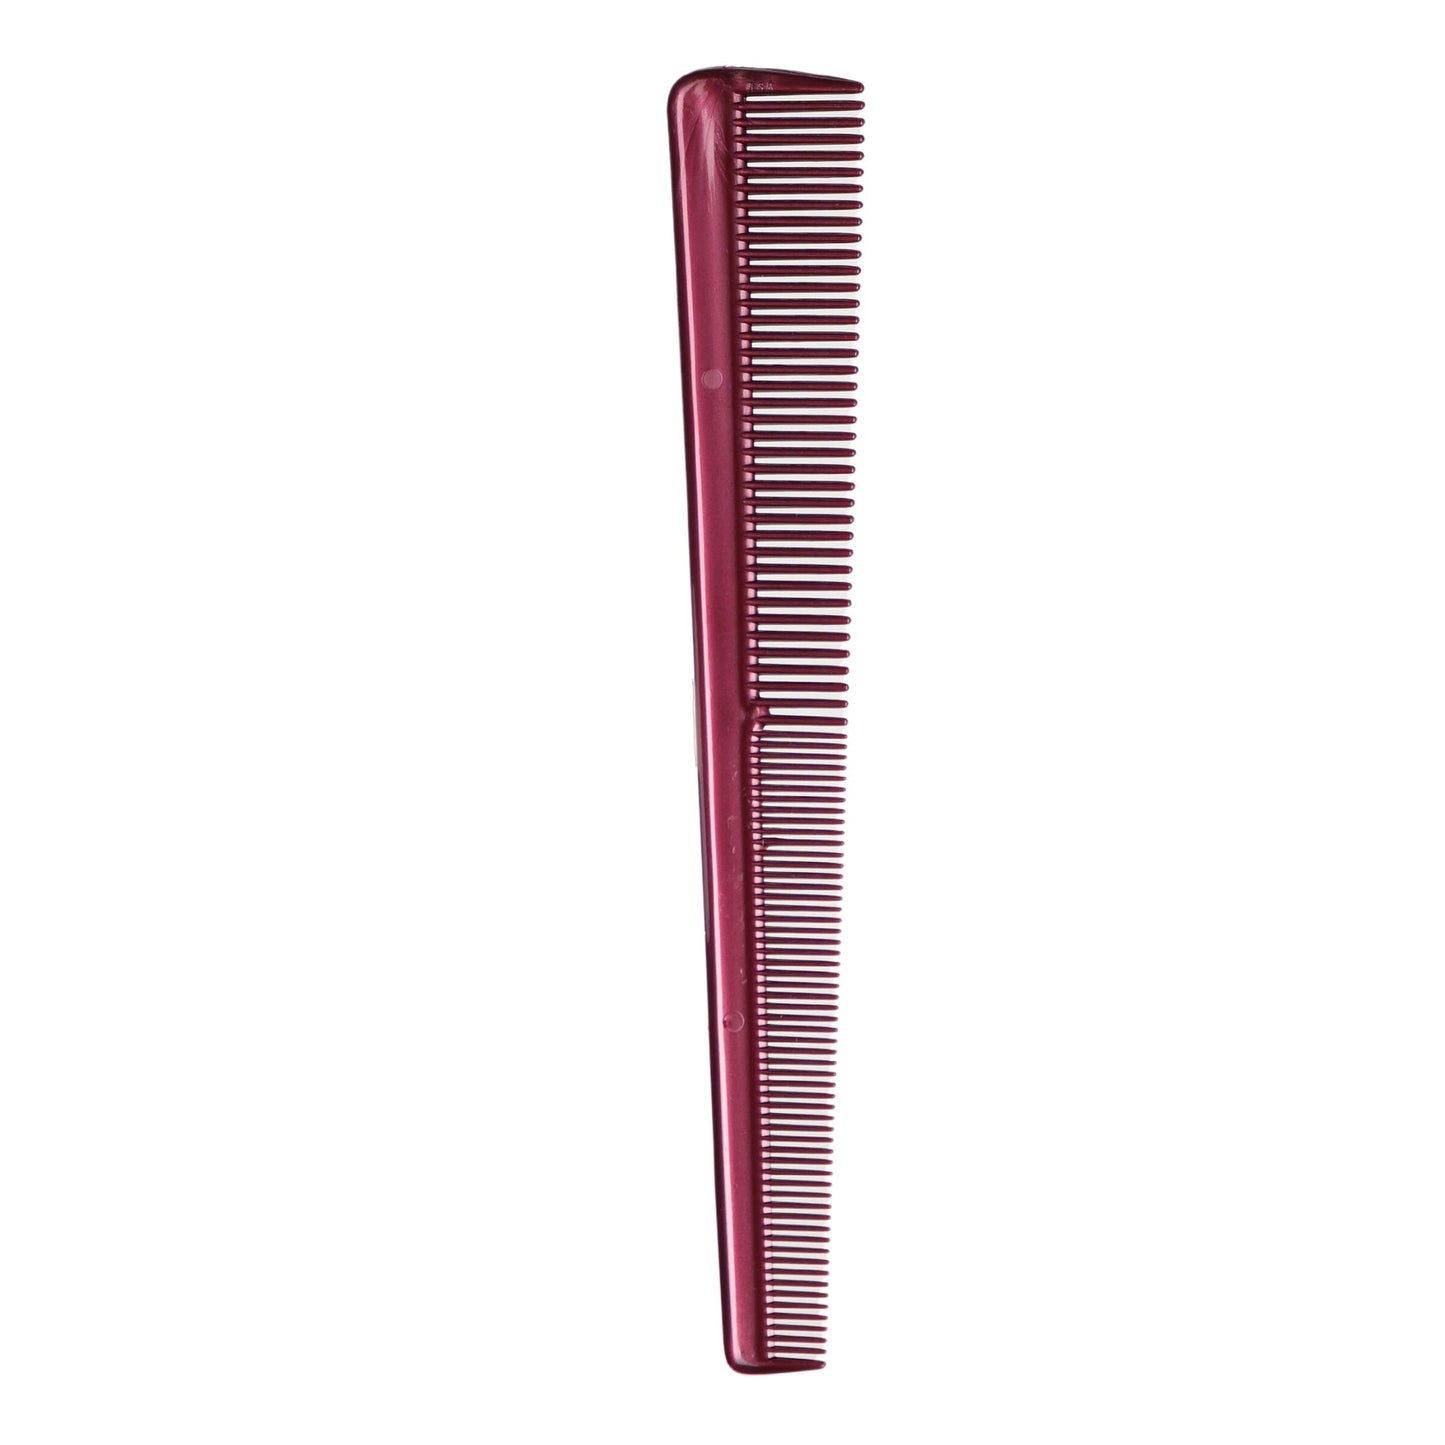 Styling Gear #131 Set of 12 Tapered Hair Cutting Styling Combs Twist Braid Flexible Ideal for Barber Hairstylists Men and Women